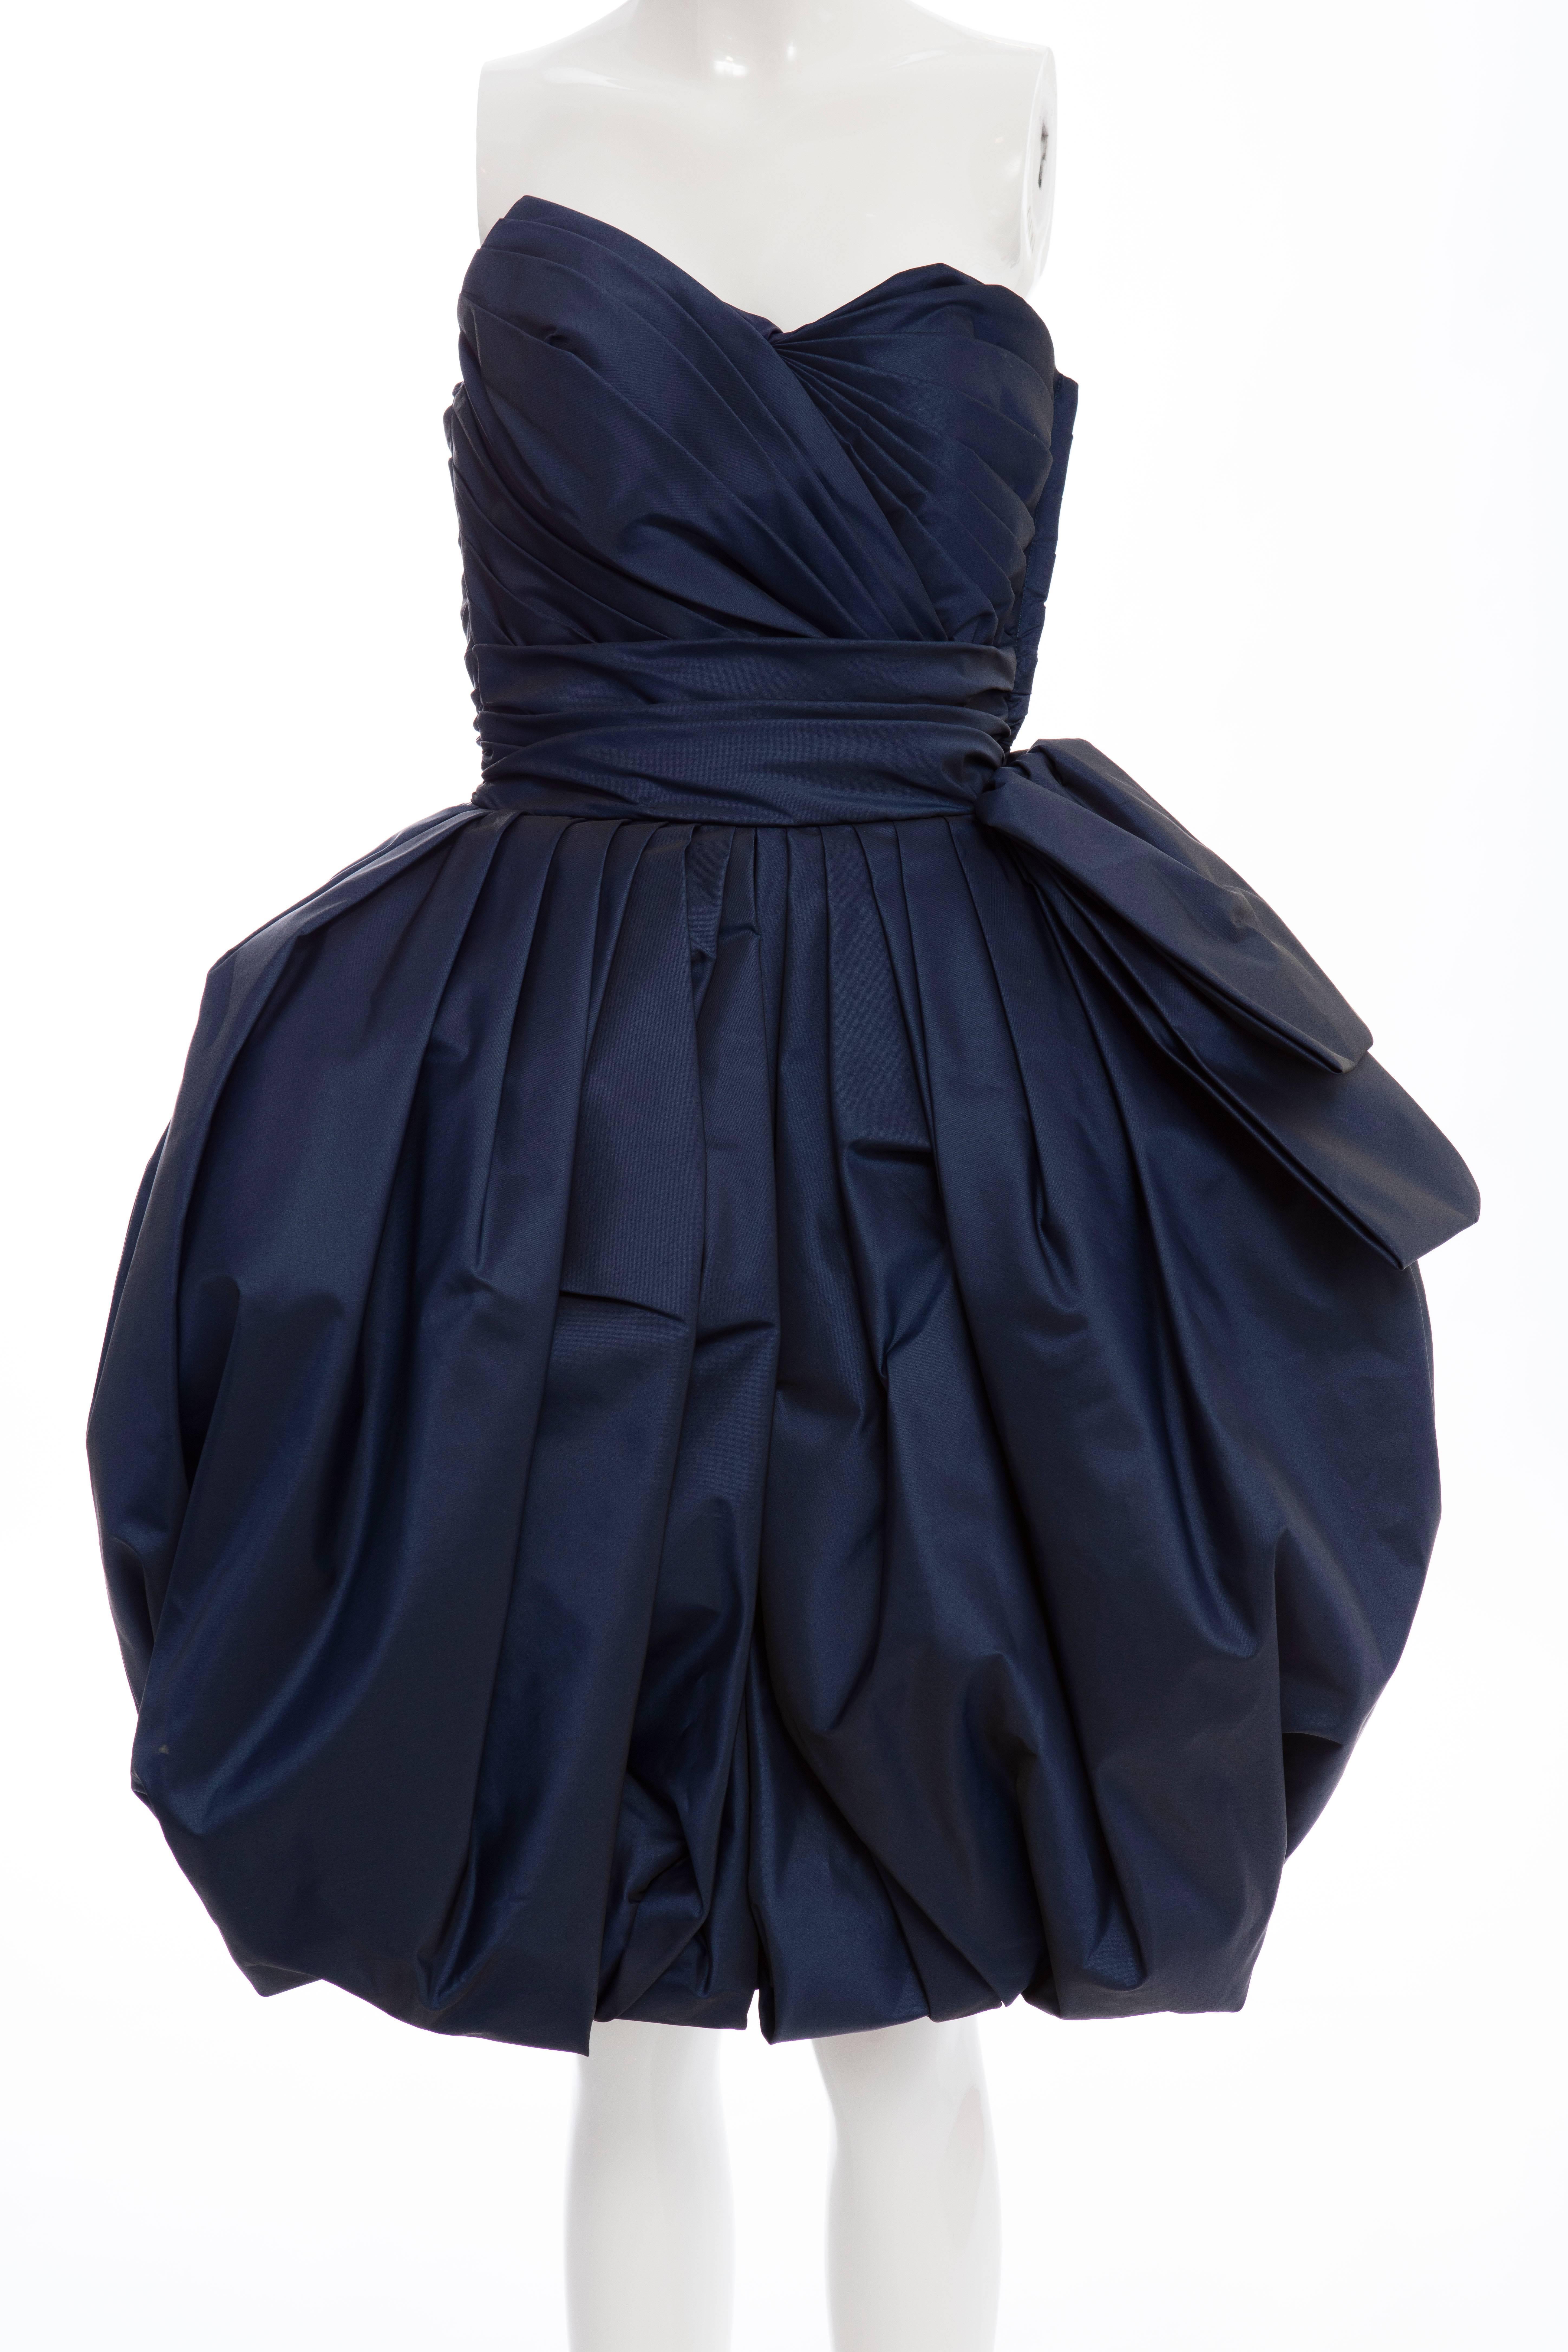 Victor Costa 1980's navy blue taffeta strapless  dress,side zip and fully lined.